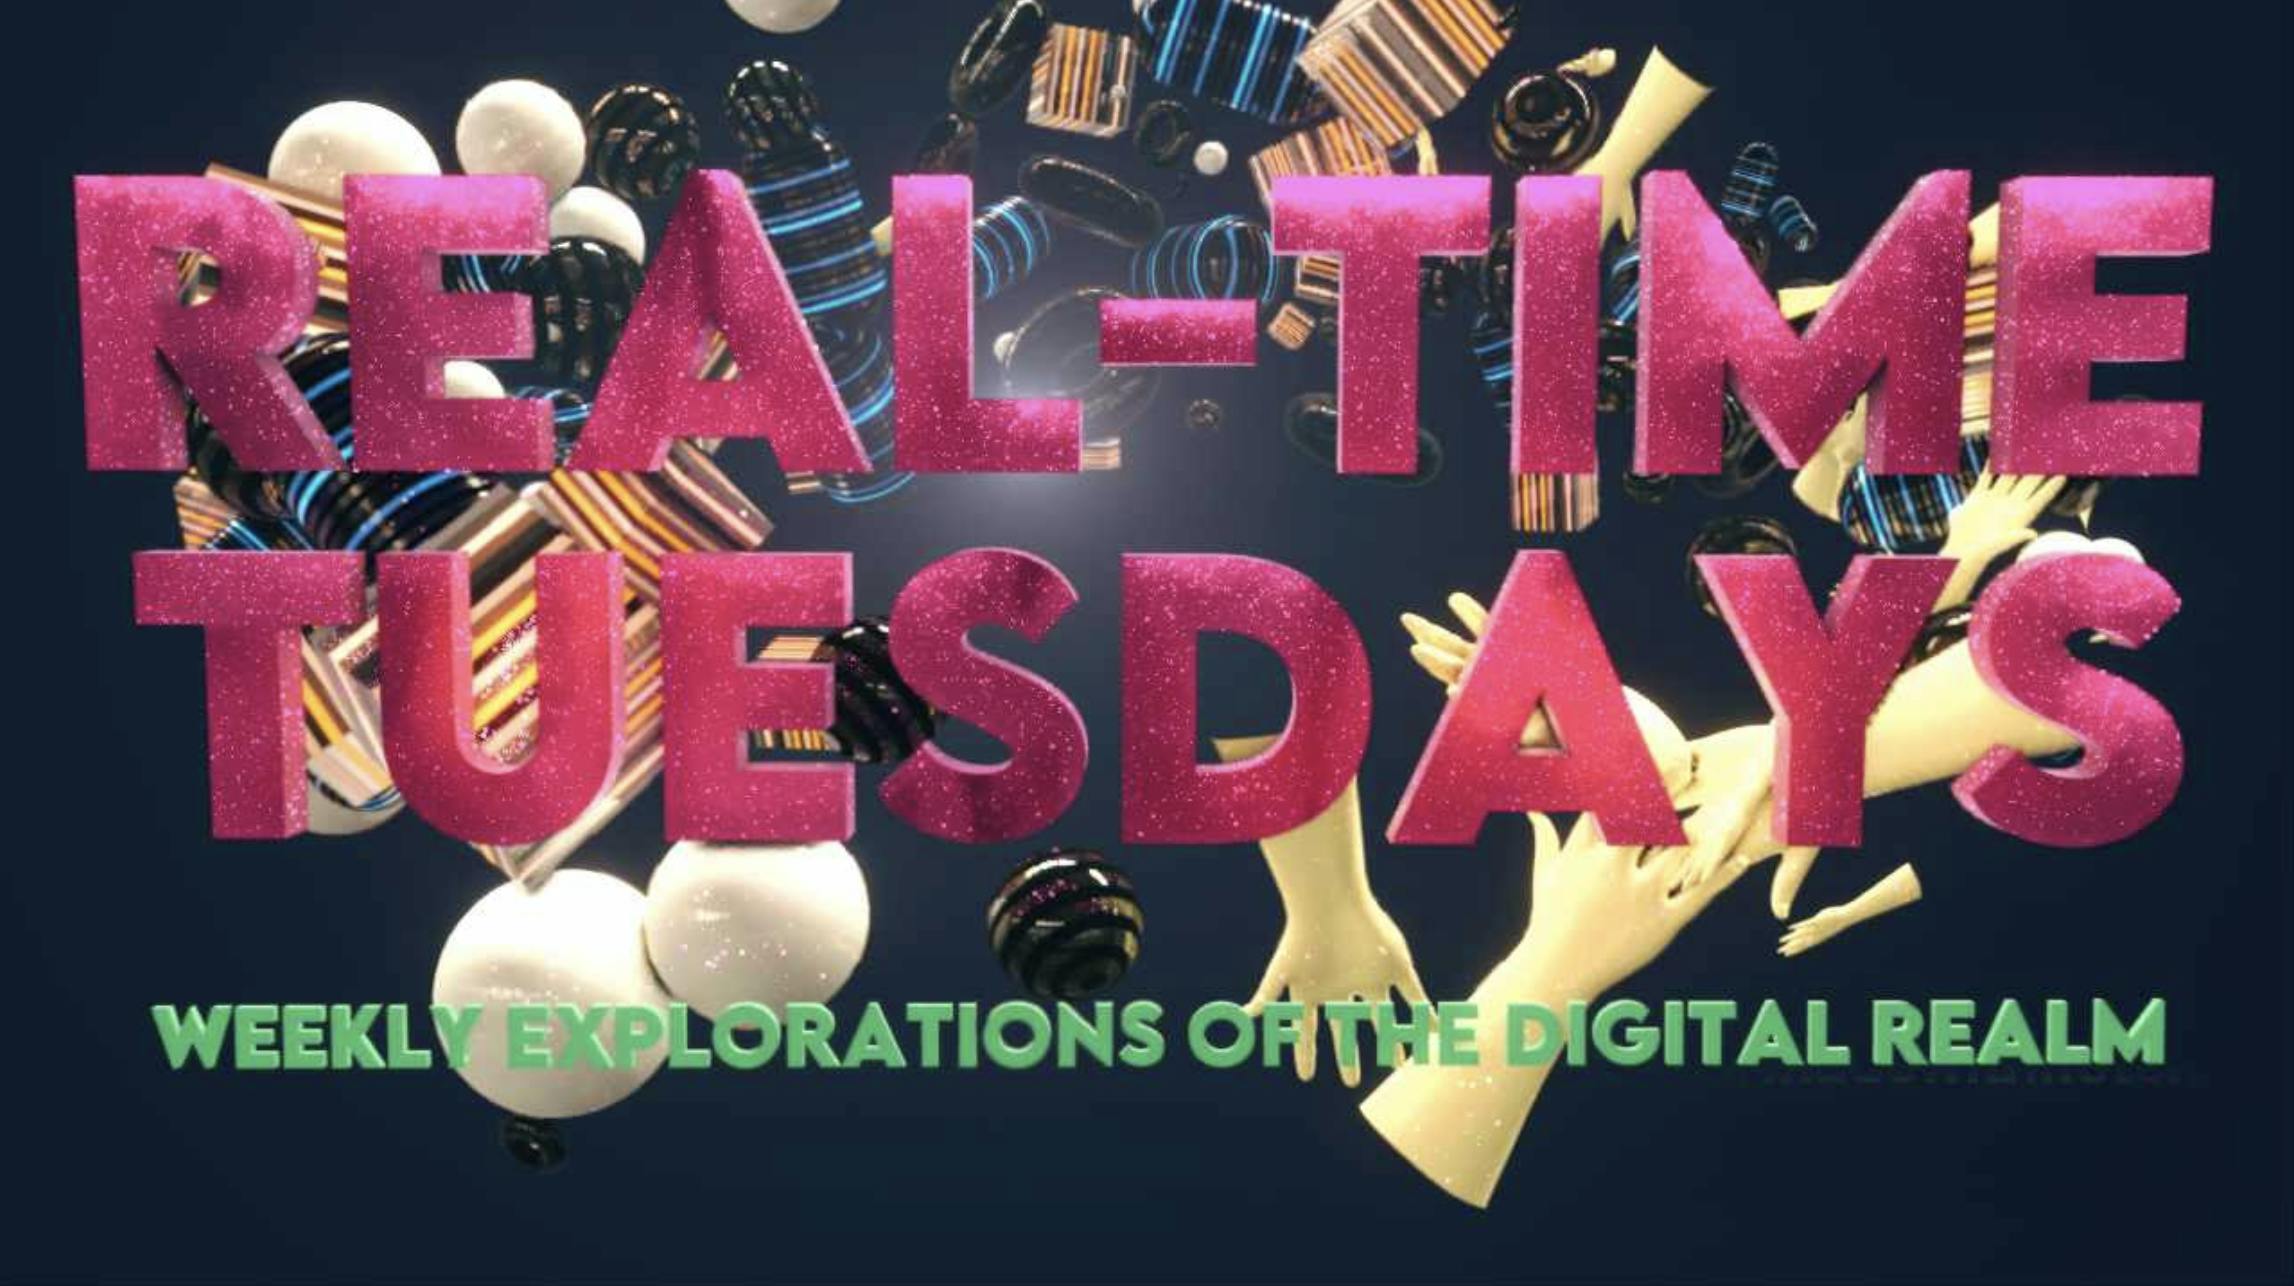 Stylized 3D text promoting Real-Time Tuesdays